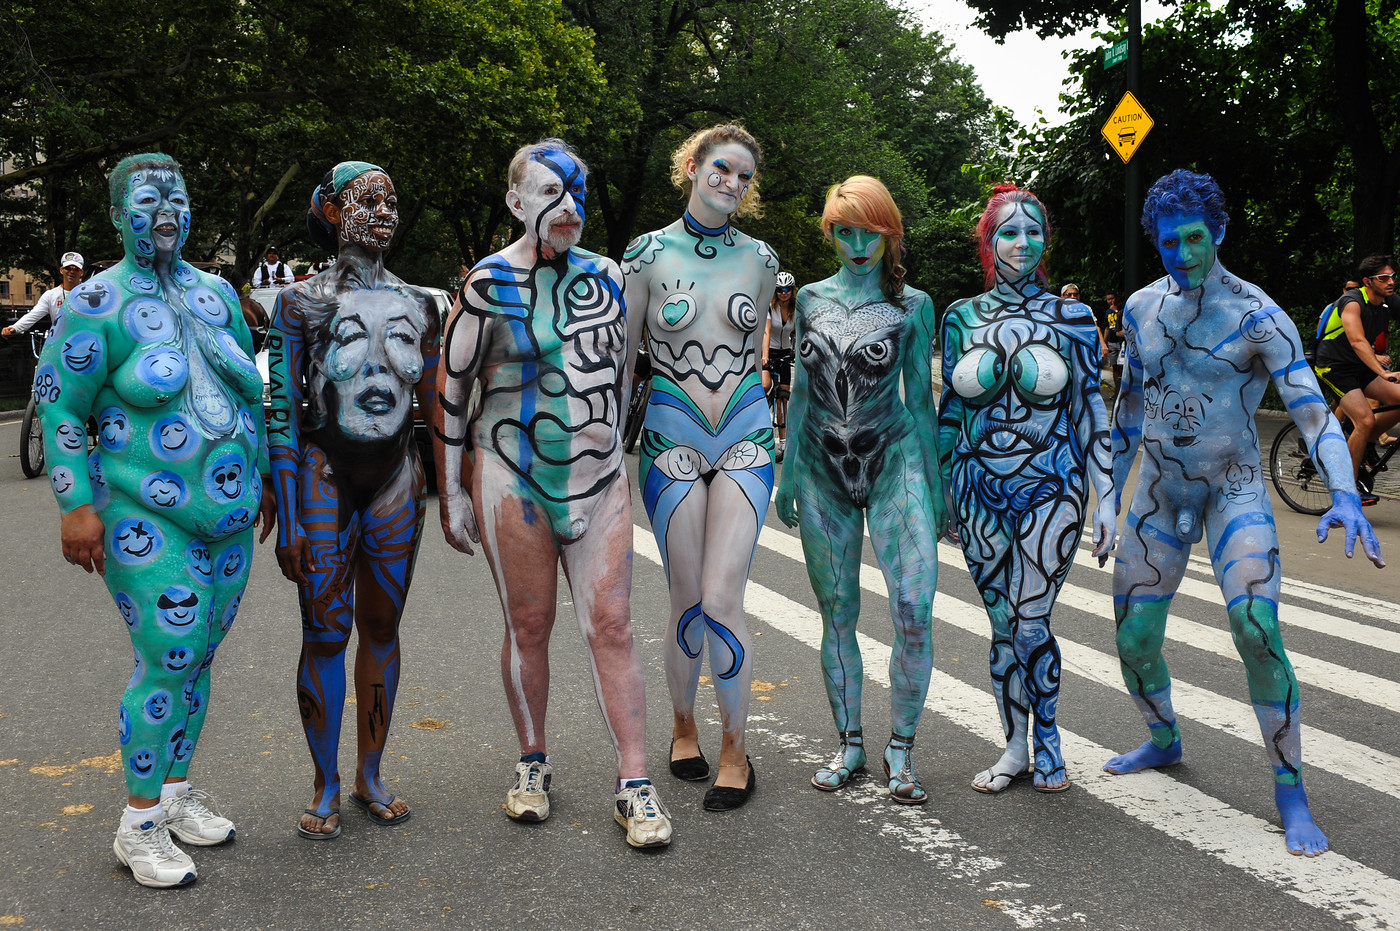 AOP 4375" by. #crowd. #america. #exotic. #bodypainting. #beauty. 